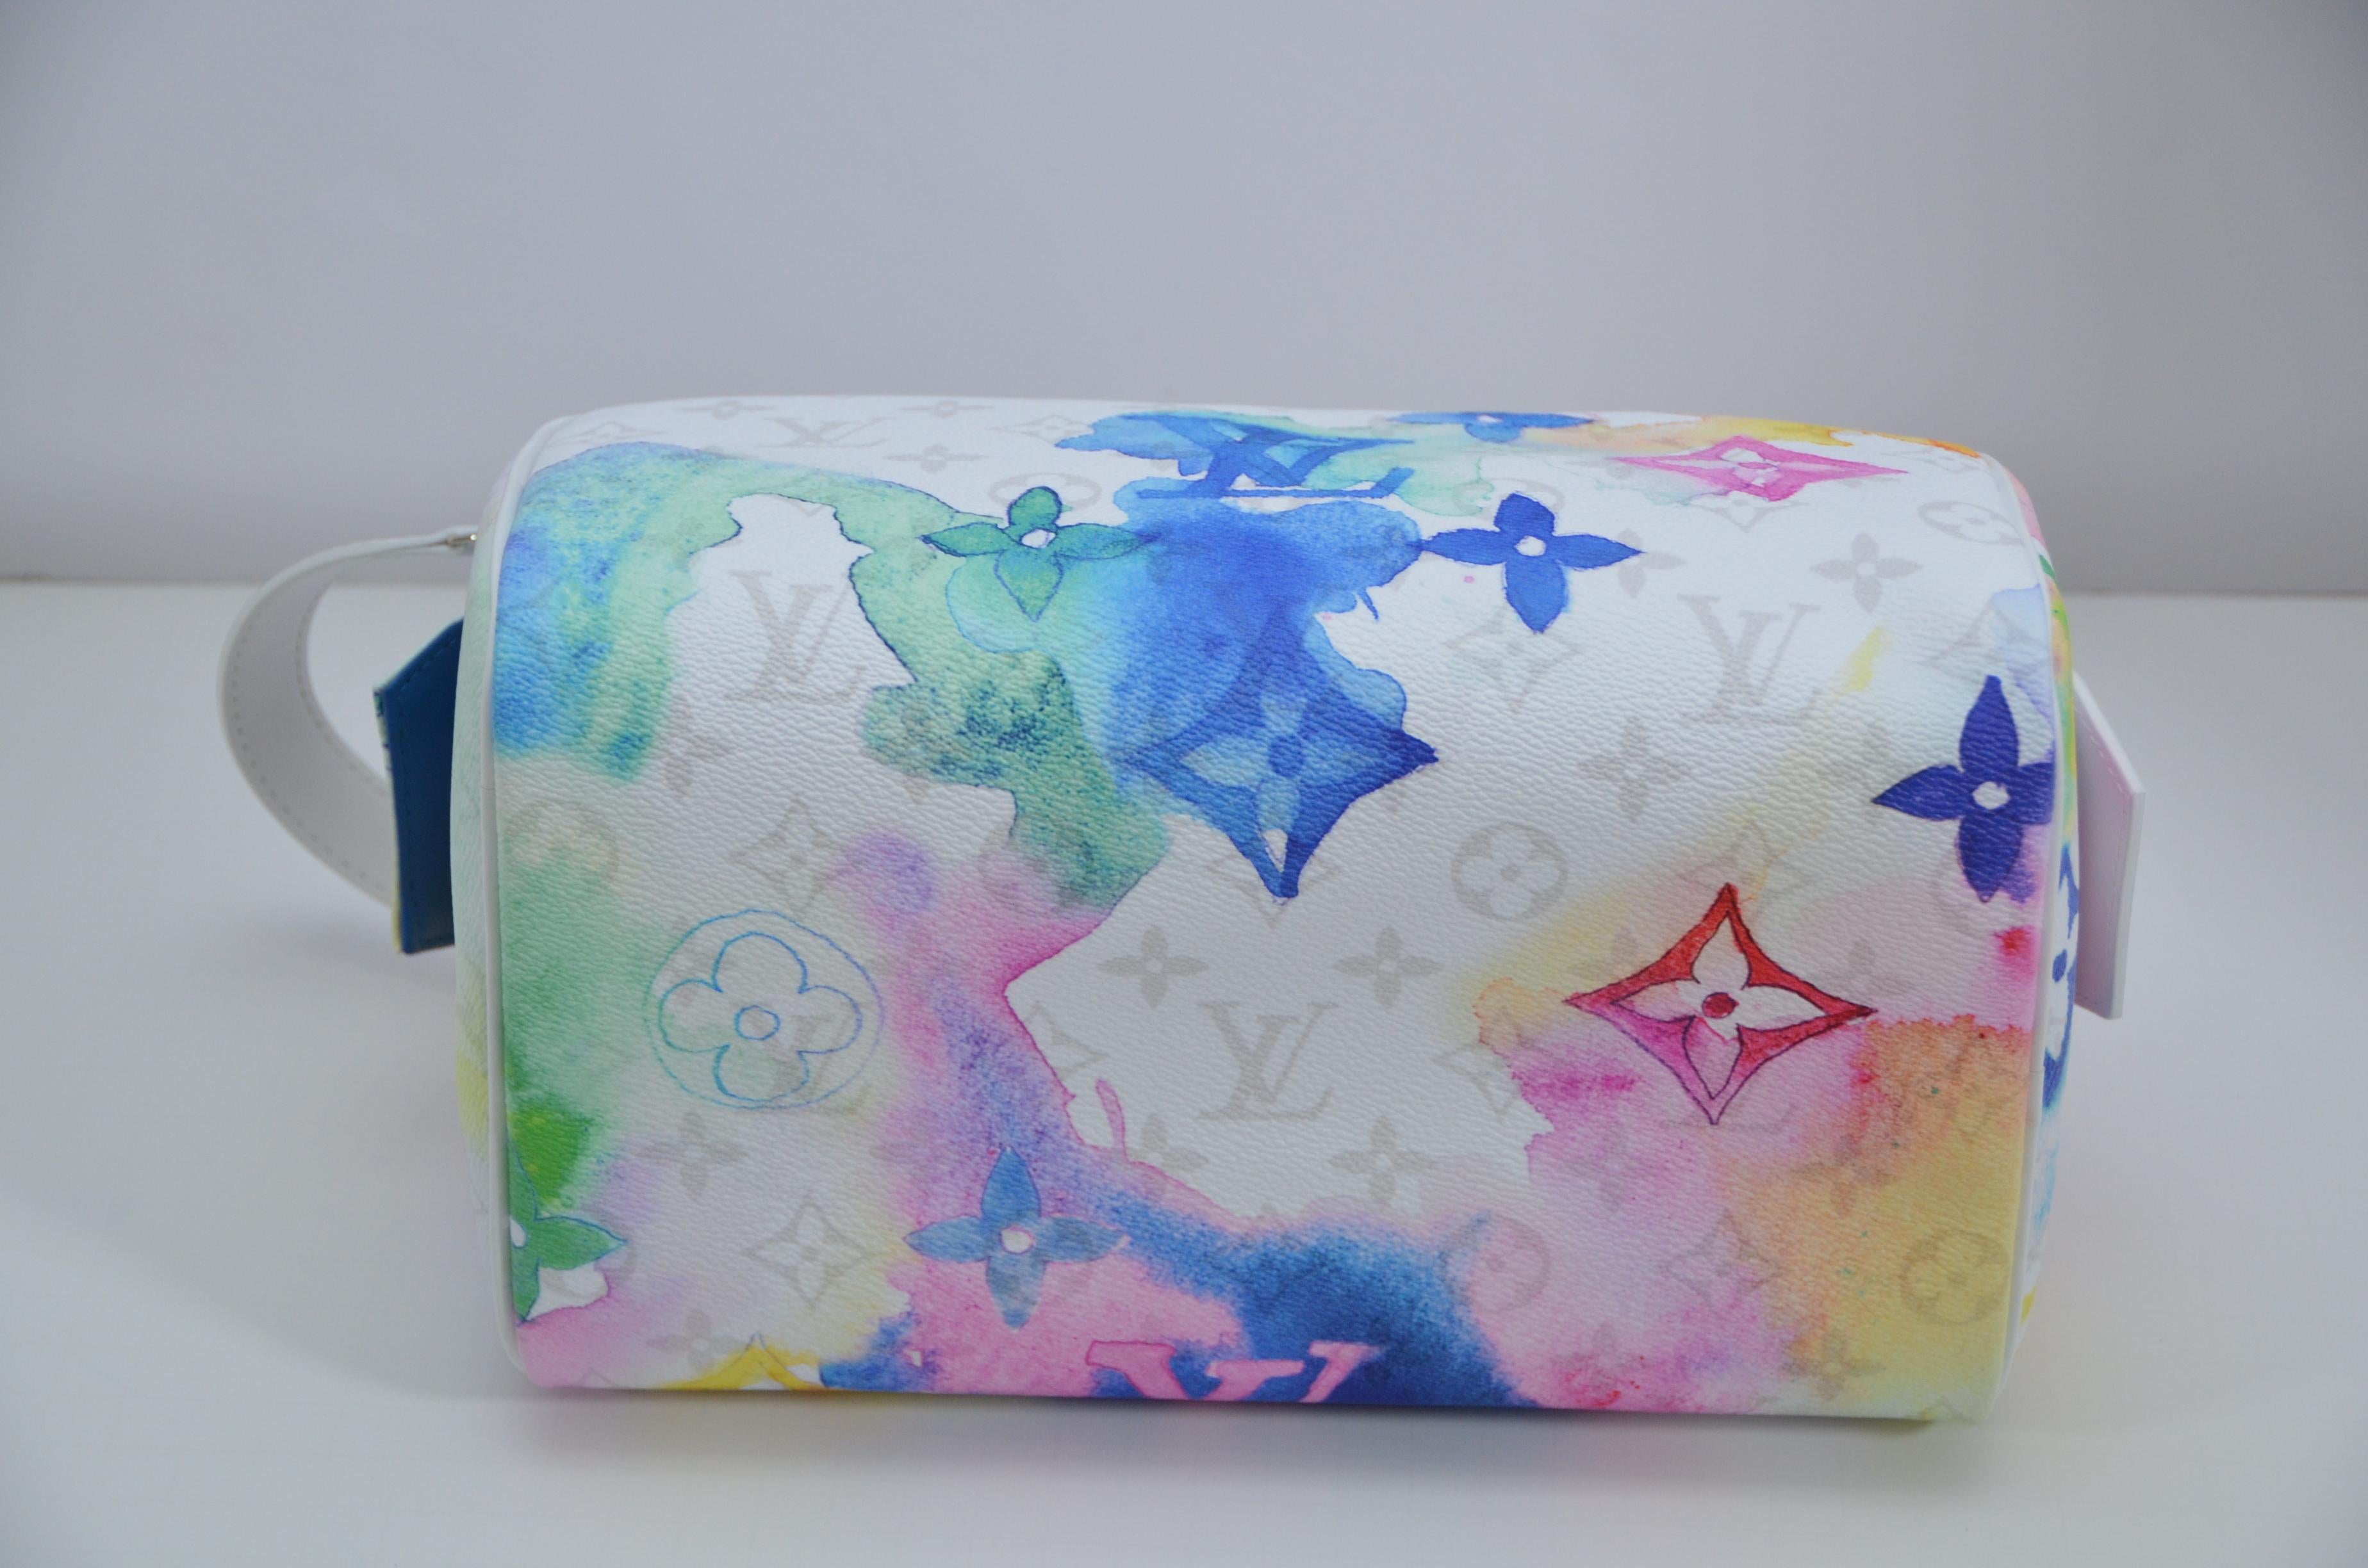 Gray Louis Vuitton Dopp Kit Bag   Watercolors   New With Tags